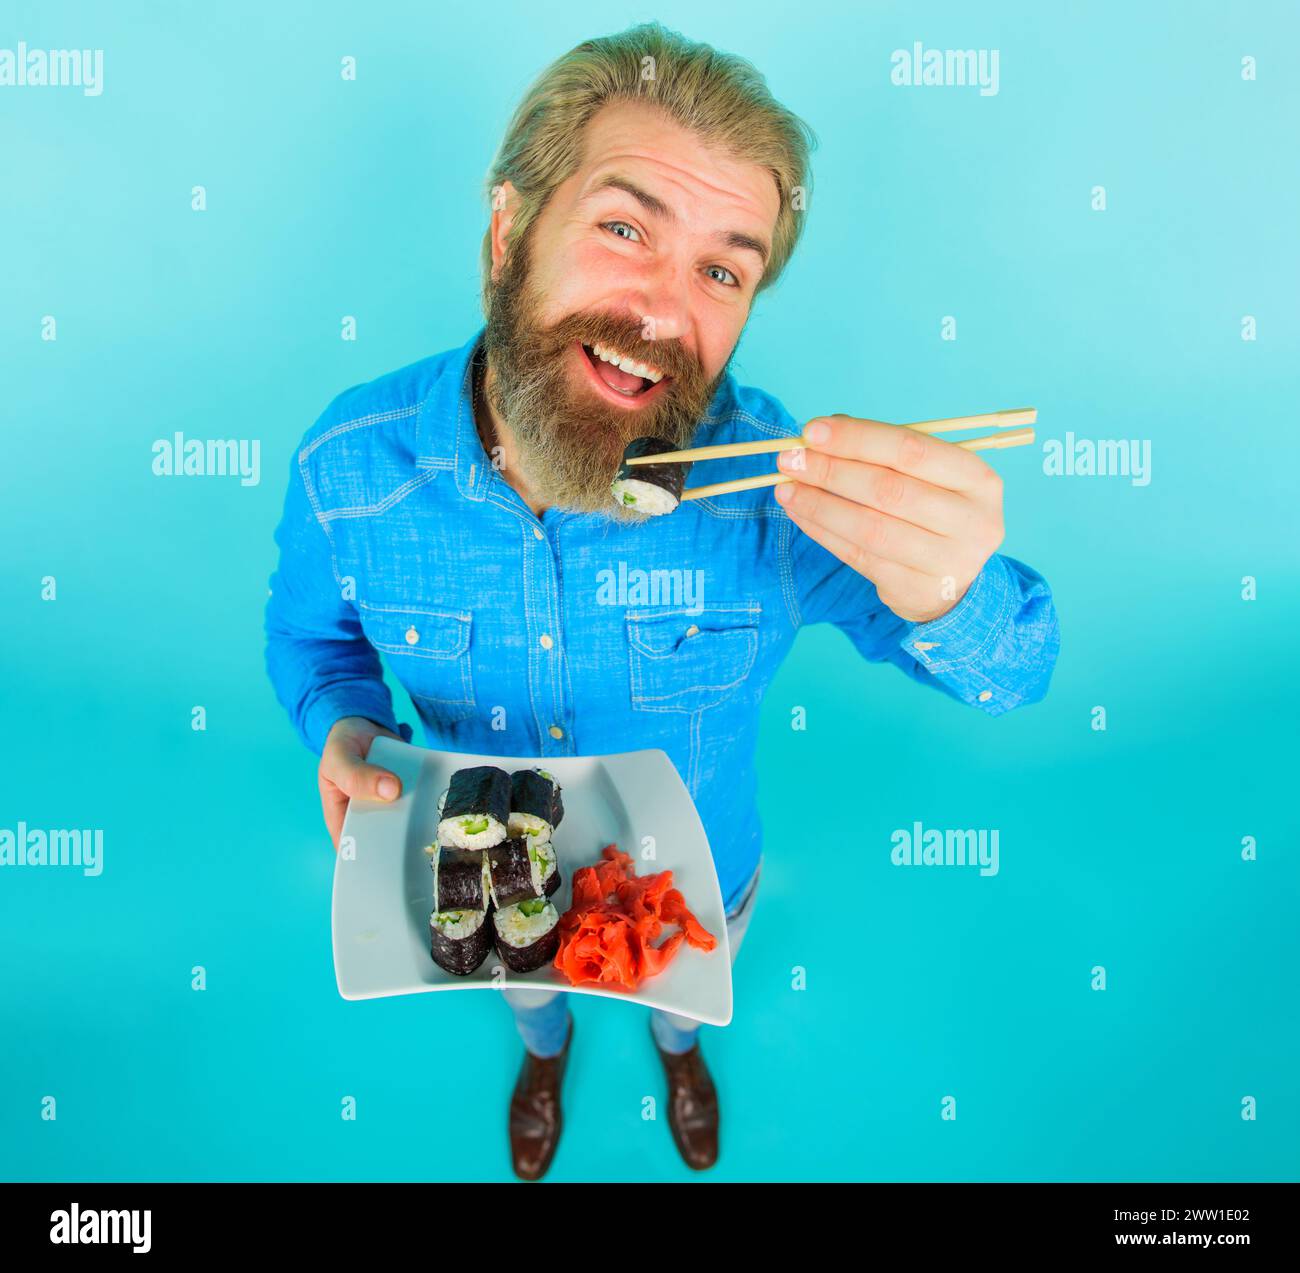 Sushi delivery. Asian food. Smiling bearded man eating tasty sushi roll with chopsticks. Japanese food. Handsome male in denim shirt with plate Stock Photo